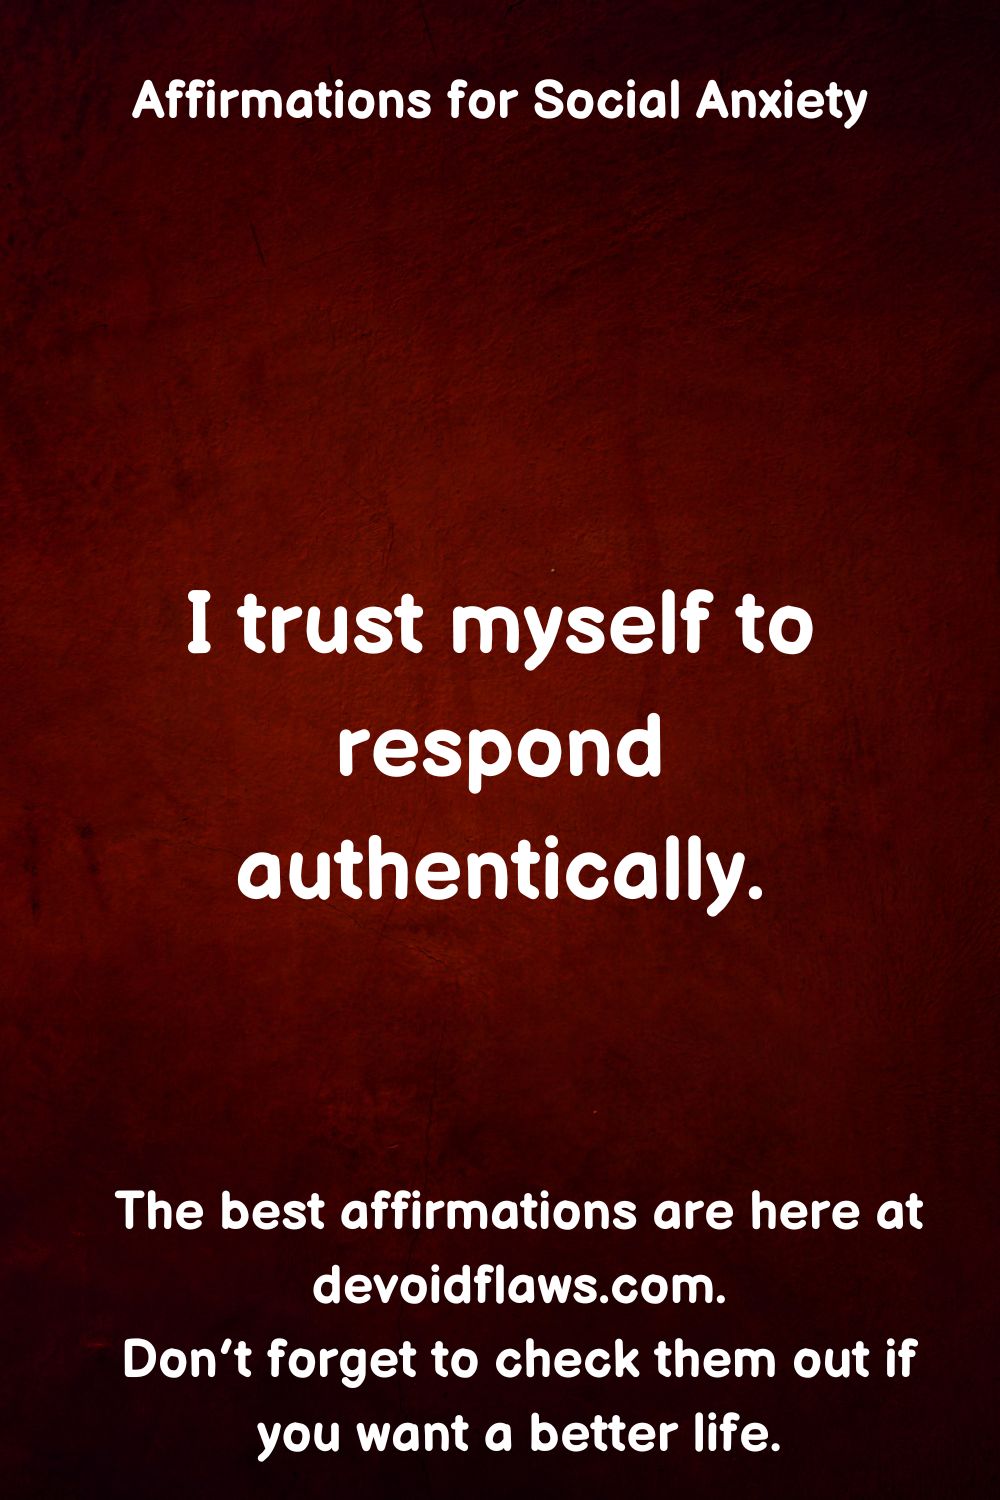 125 Affirmations to Overcome Social Anxiety